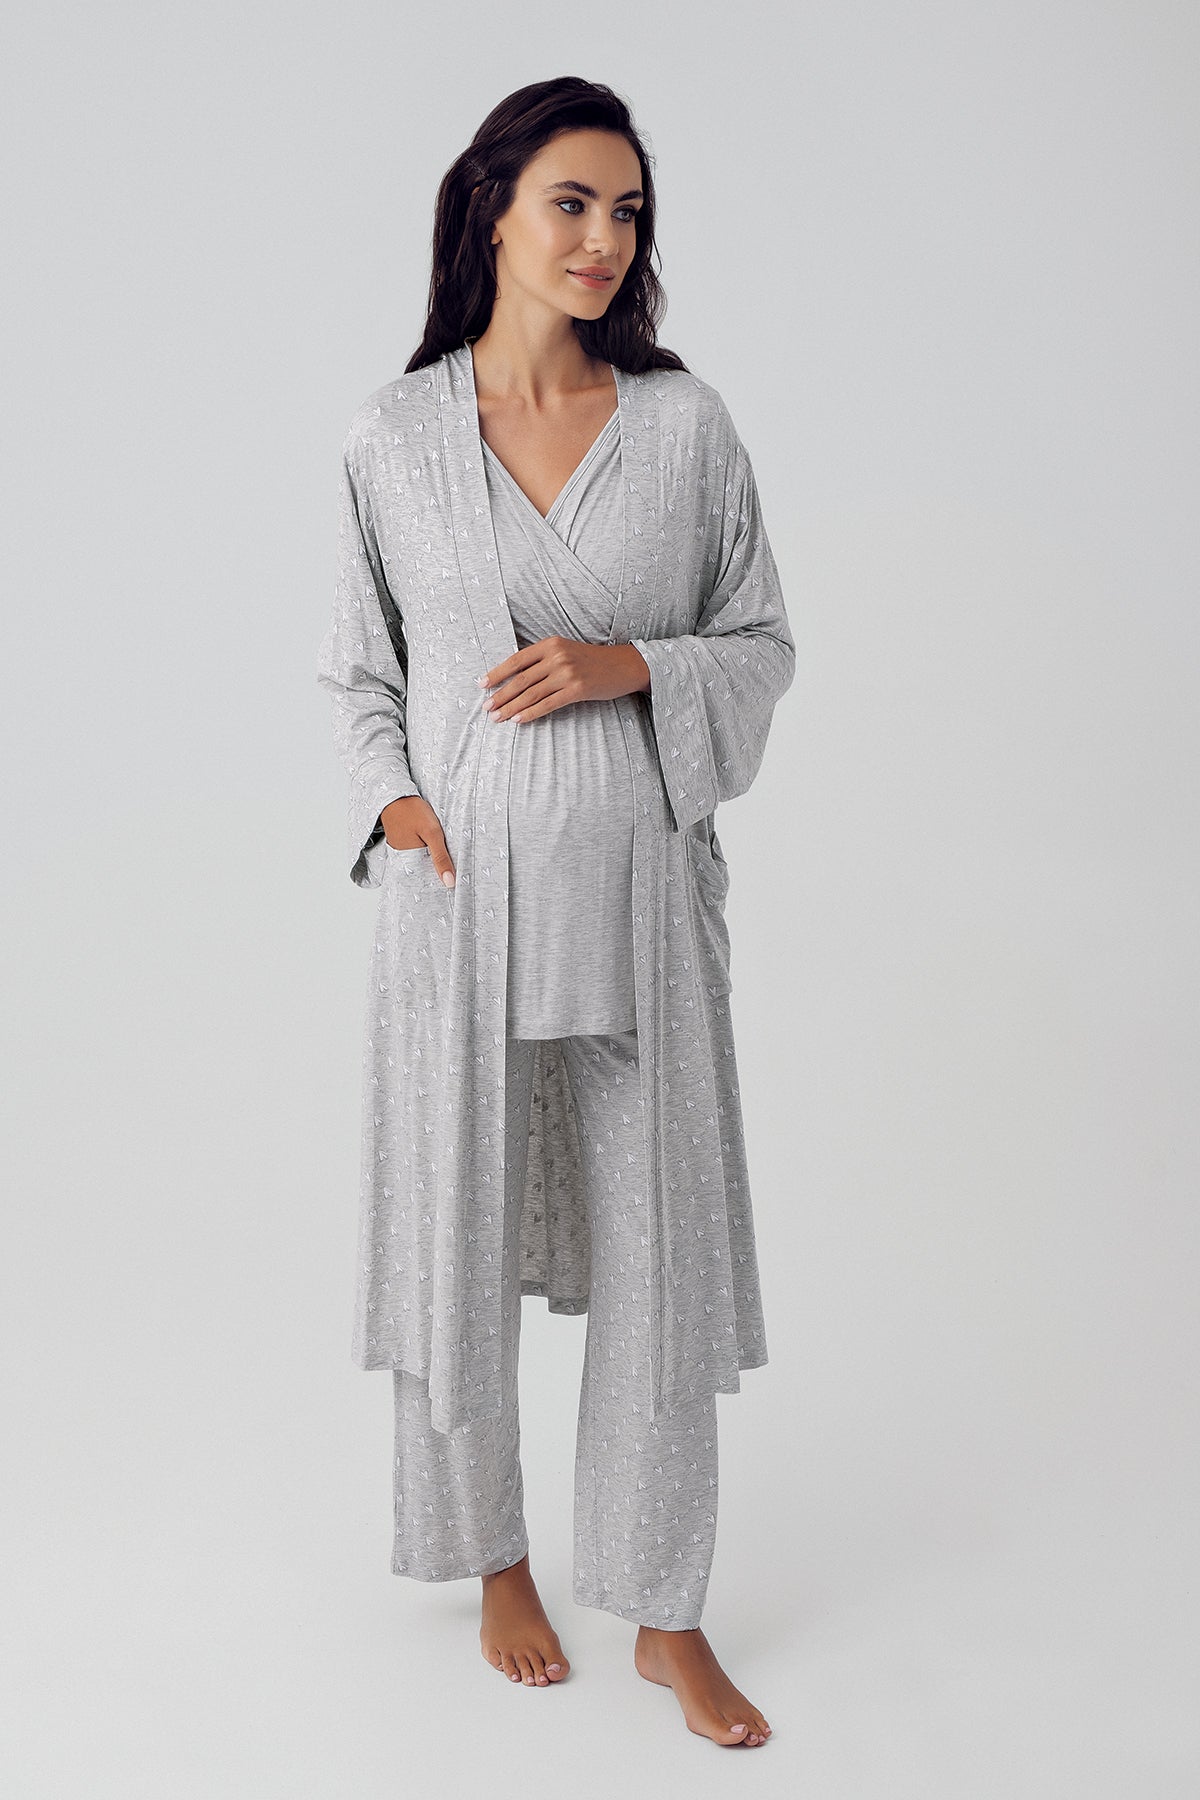 Shopymommy 15302 Double Breasted 3-Pieces Maternity & Nursing Pajamas With Polka Dot Robe Grey